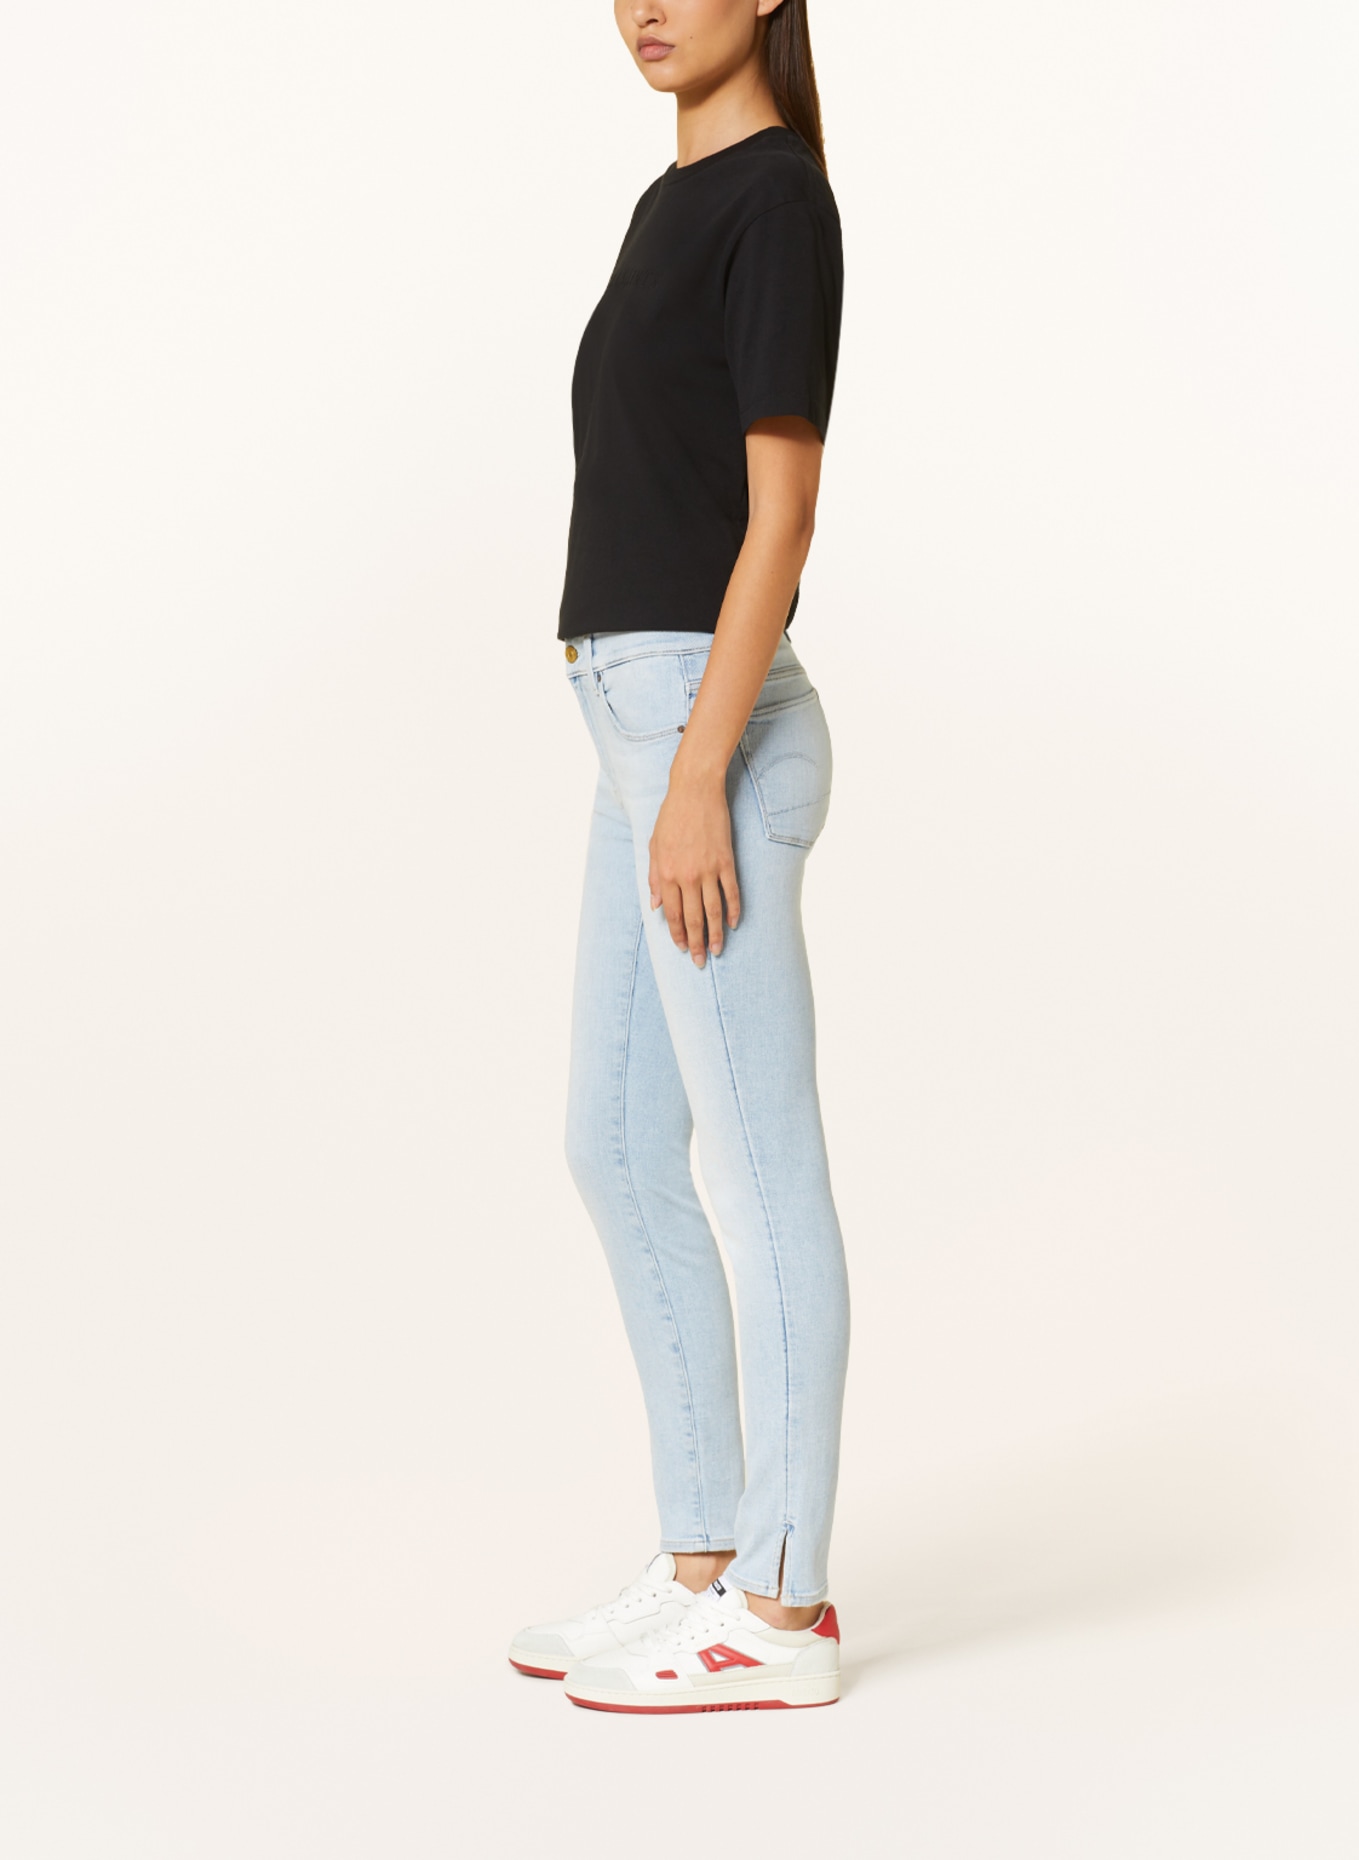 G-Star RAW Skinny jeans 3301, Color: G307 sun faded bluejay (Image 4)